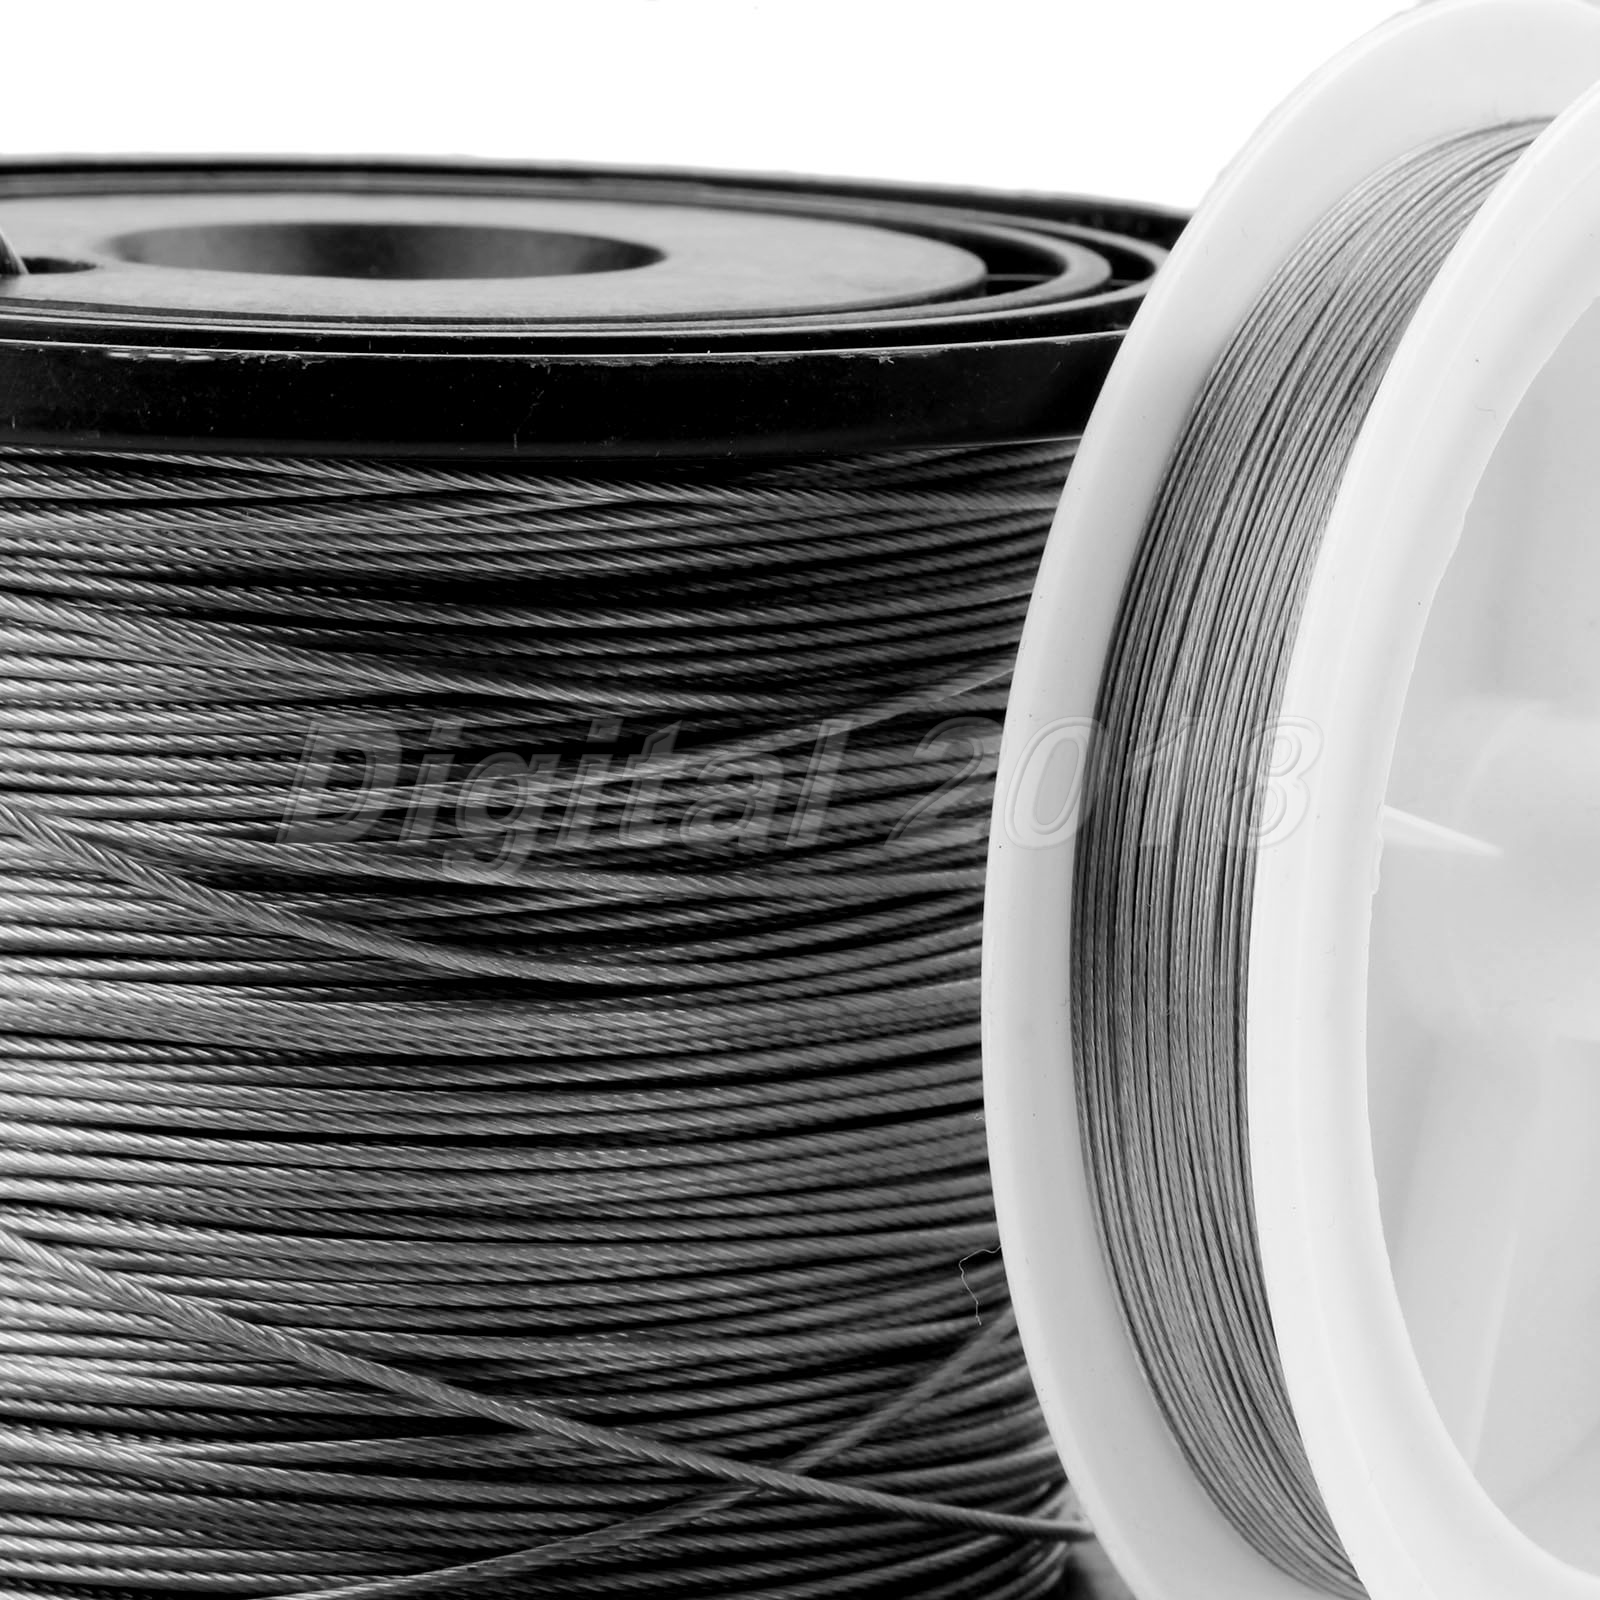 50M Strength Braided 7 Strands Stainless Steel Wire Fishing Line Test 6 Stainless Steel Wire Fishing Line